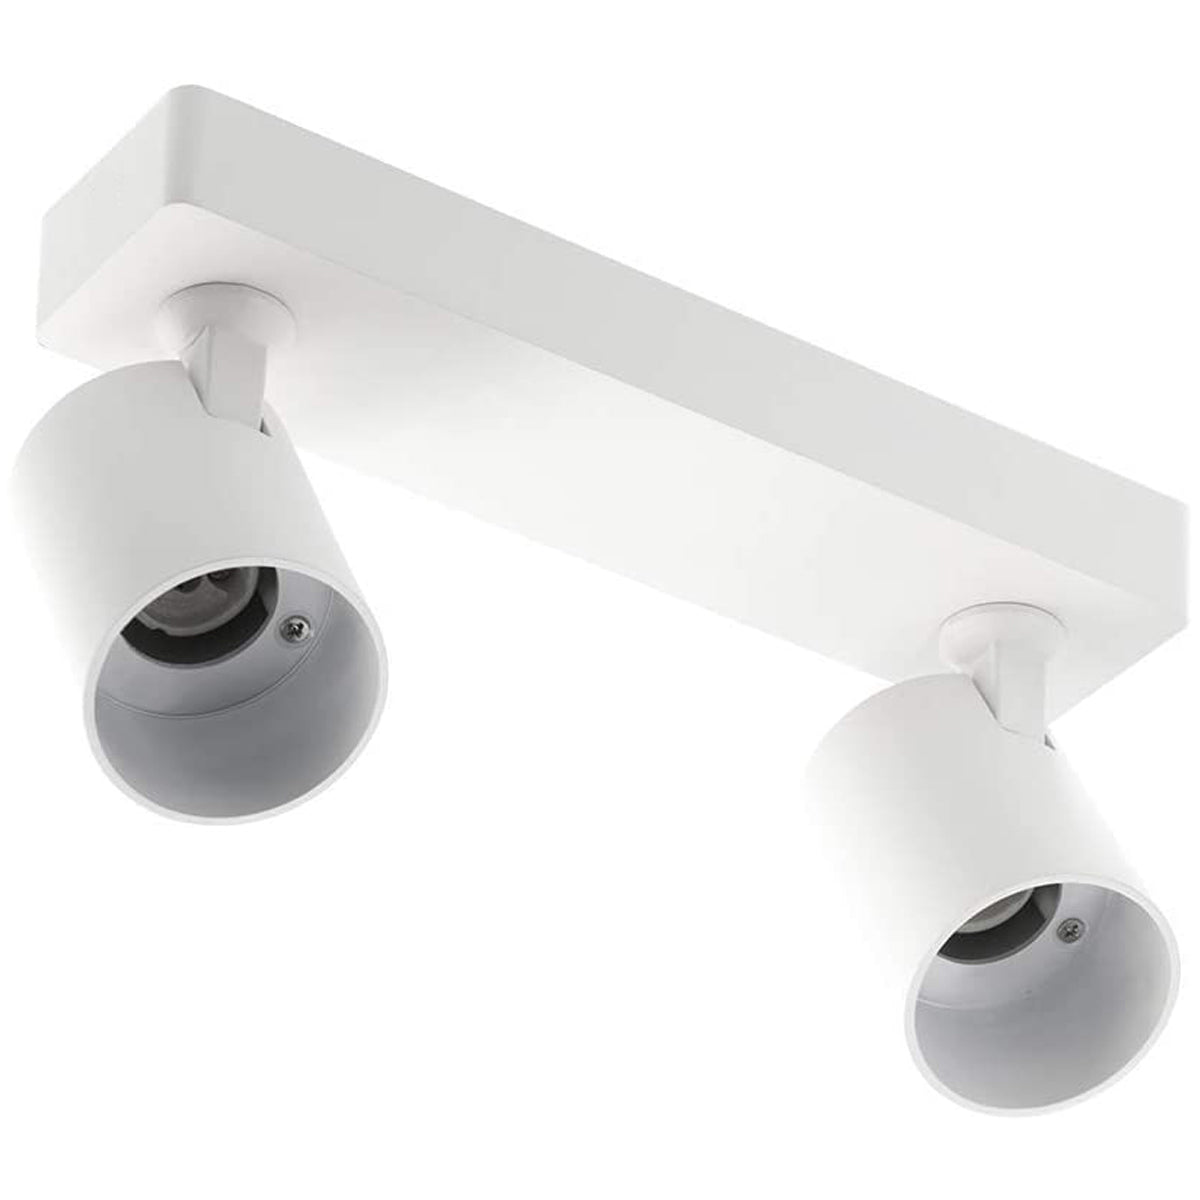 The white Nell lamp consists of two cylindrical spotlights, both of which can be tilted and adjusted on their own axis. The spotlights are attached to a rectangular bracket, which makes them equally suitable for mounting on walls and ceilings. Made of an aluminium body and powder coated white, the lamp with its simple design fits well into different spaces. Whether functional office or cosy home